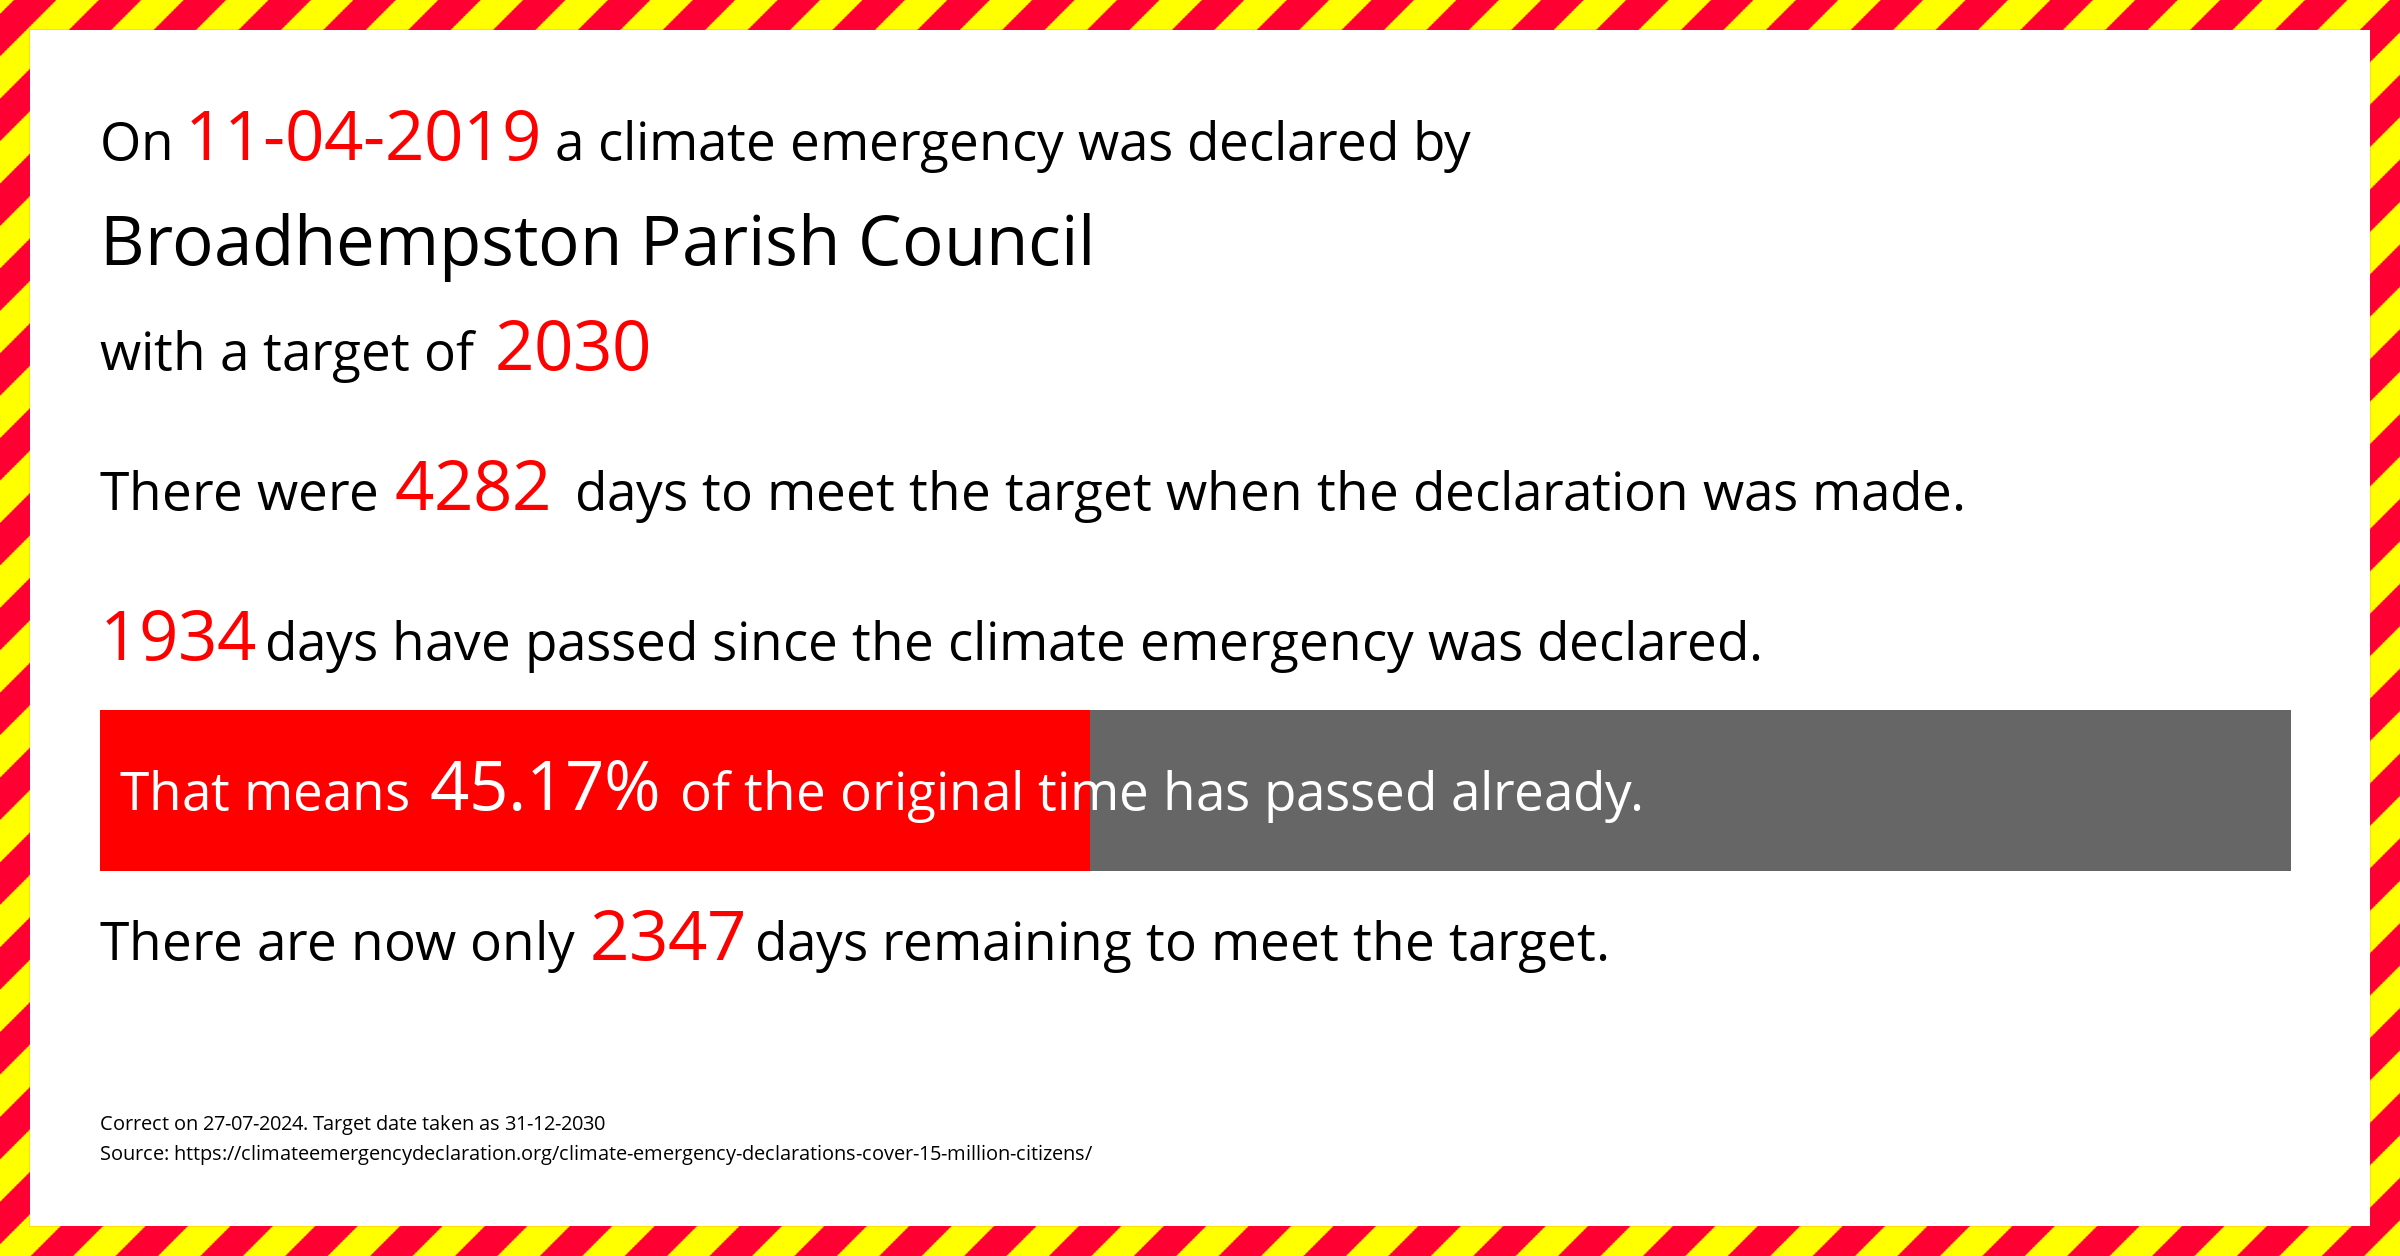 Broadhempston Parish Council declared a Climate emergency on Thursday 11th April 2019, with a target of 2030.